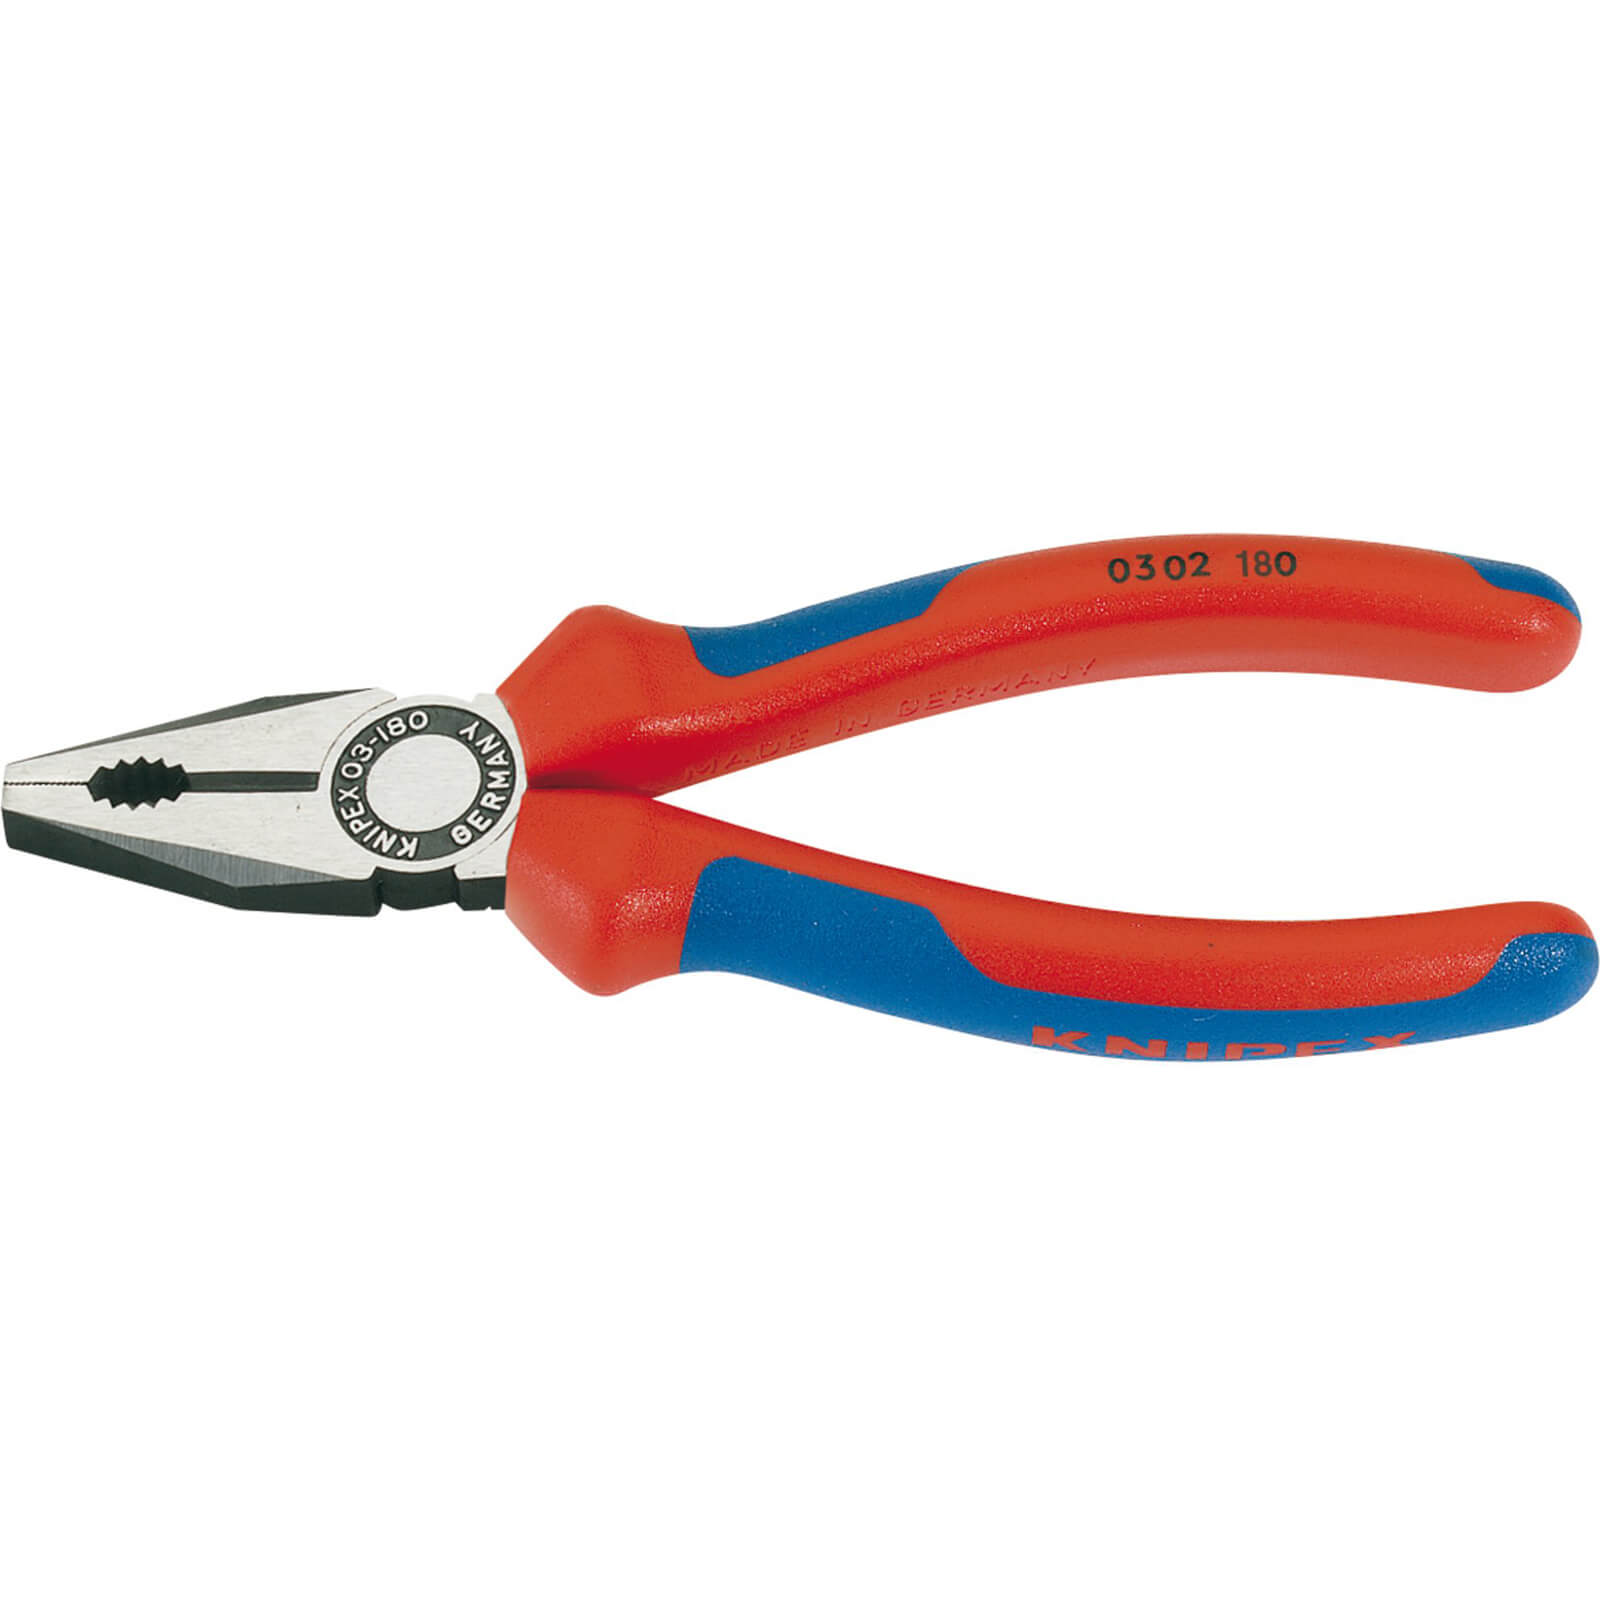 Image of Knipex Heavy Duty Combination Pliers 180mm